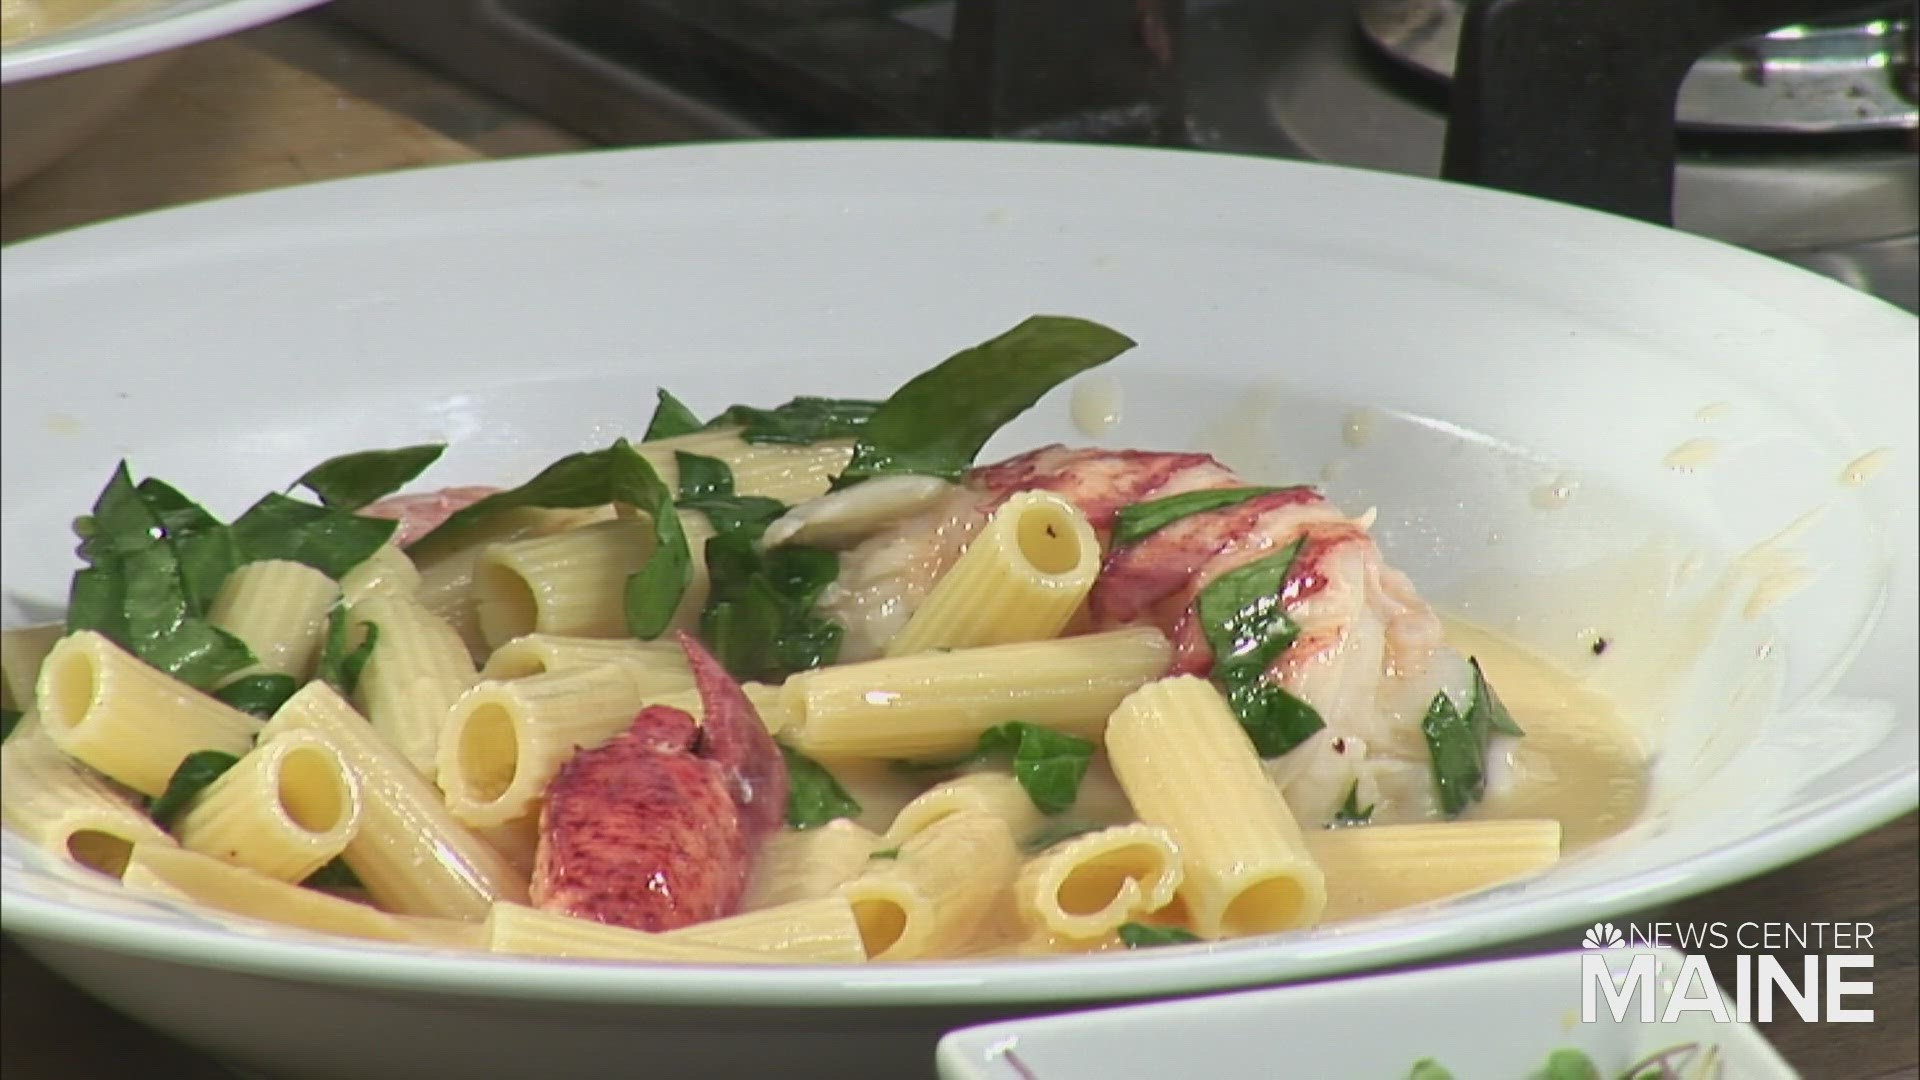 Chef David Turin joins us to share his recipe that’s easy to make.